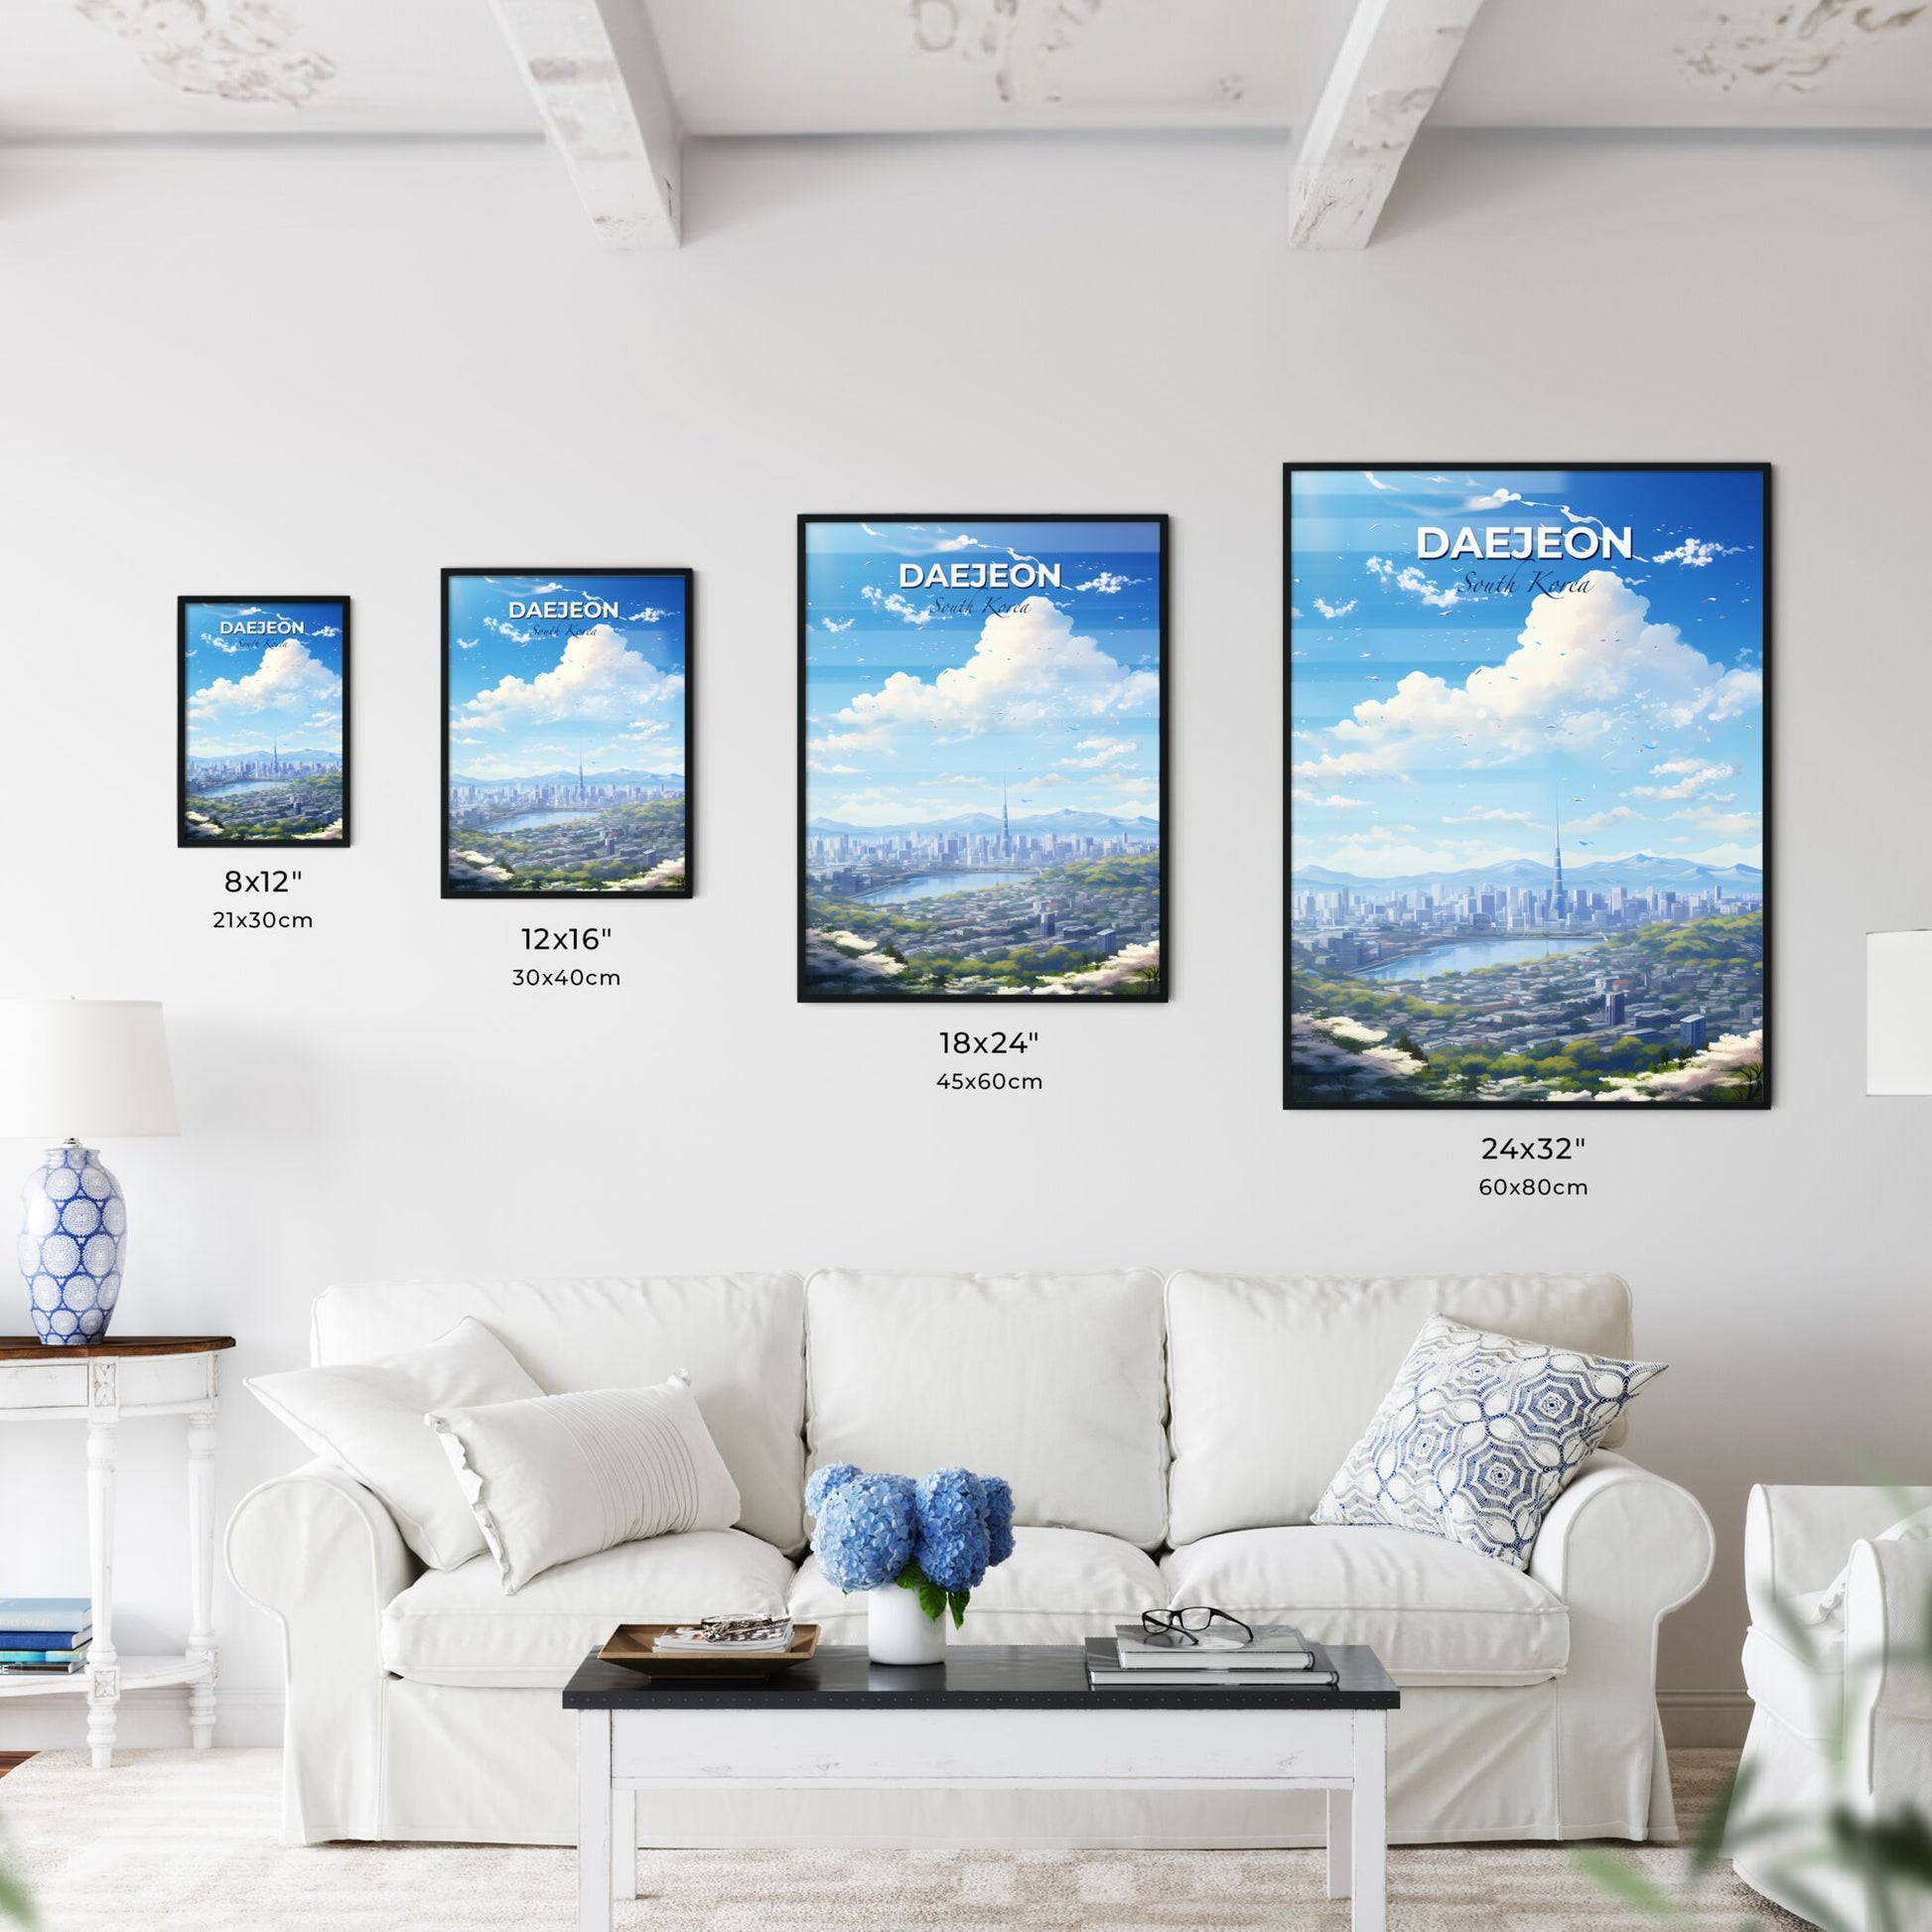 Daejeon South Korea Skyline - A City Landscape With A Lake And Mountains - Customizable Travel Gift Default Title